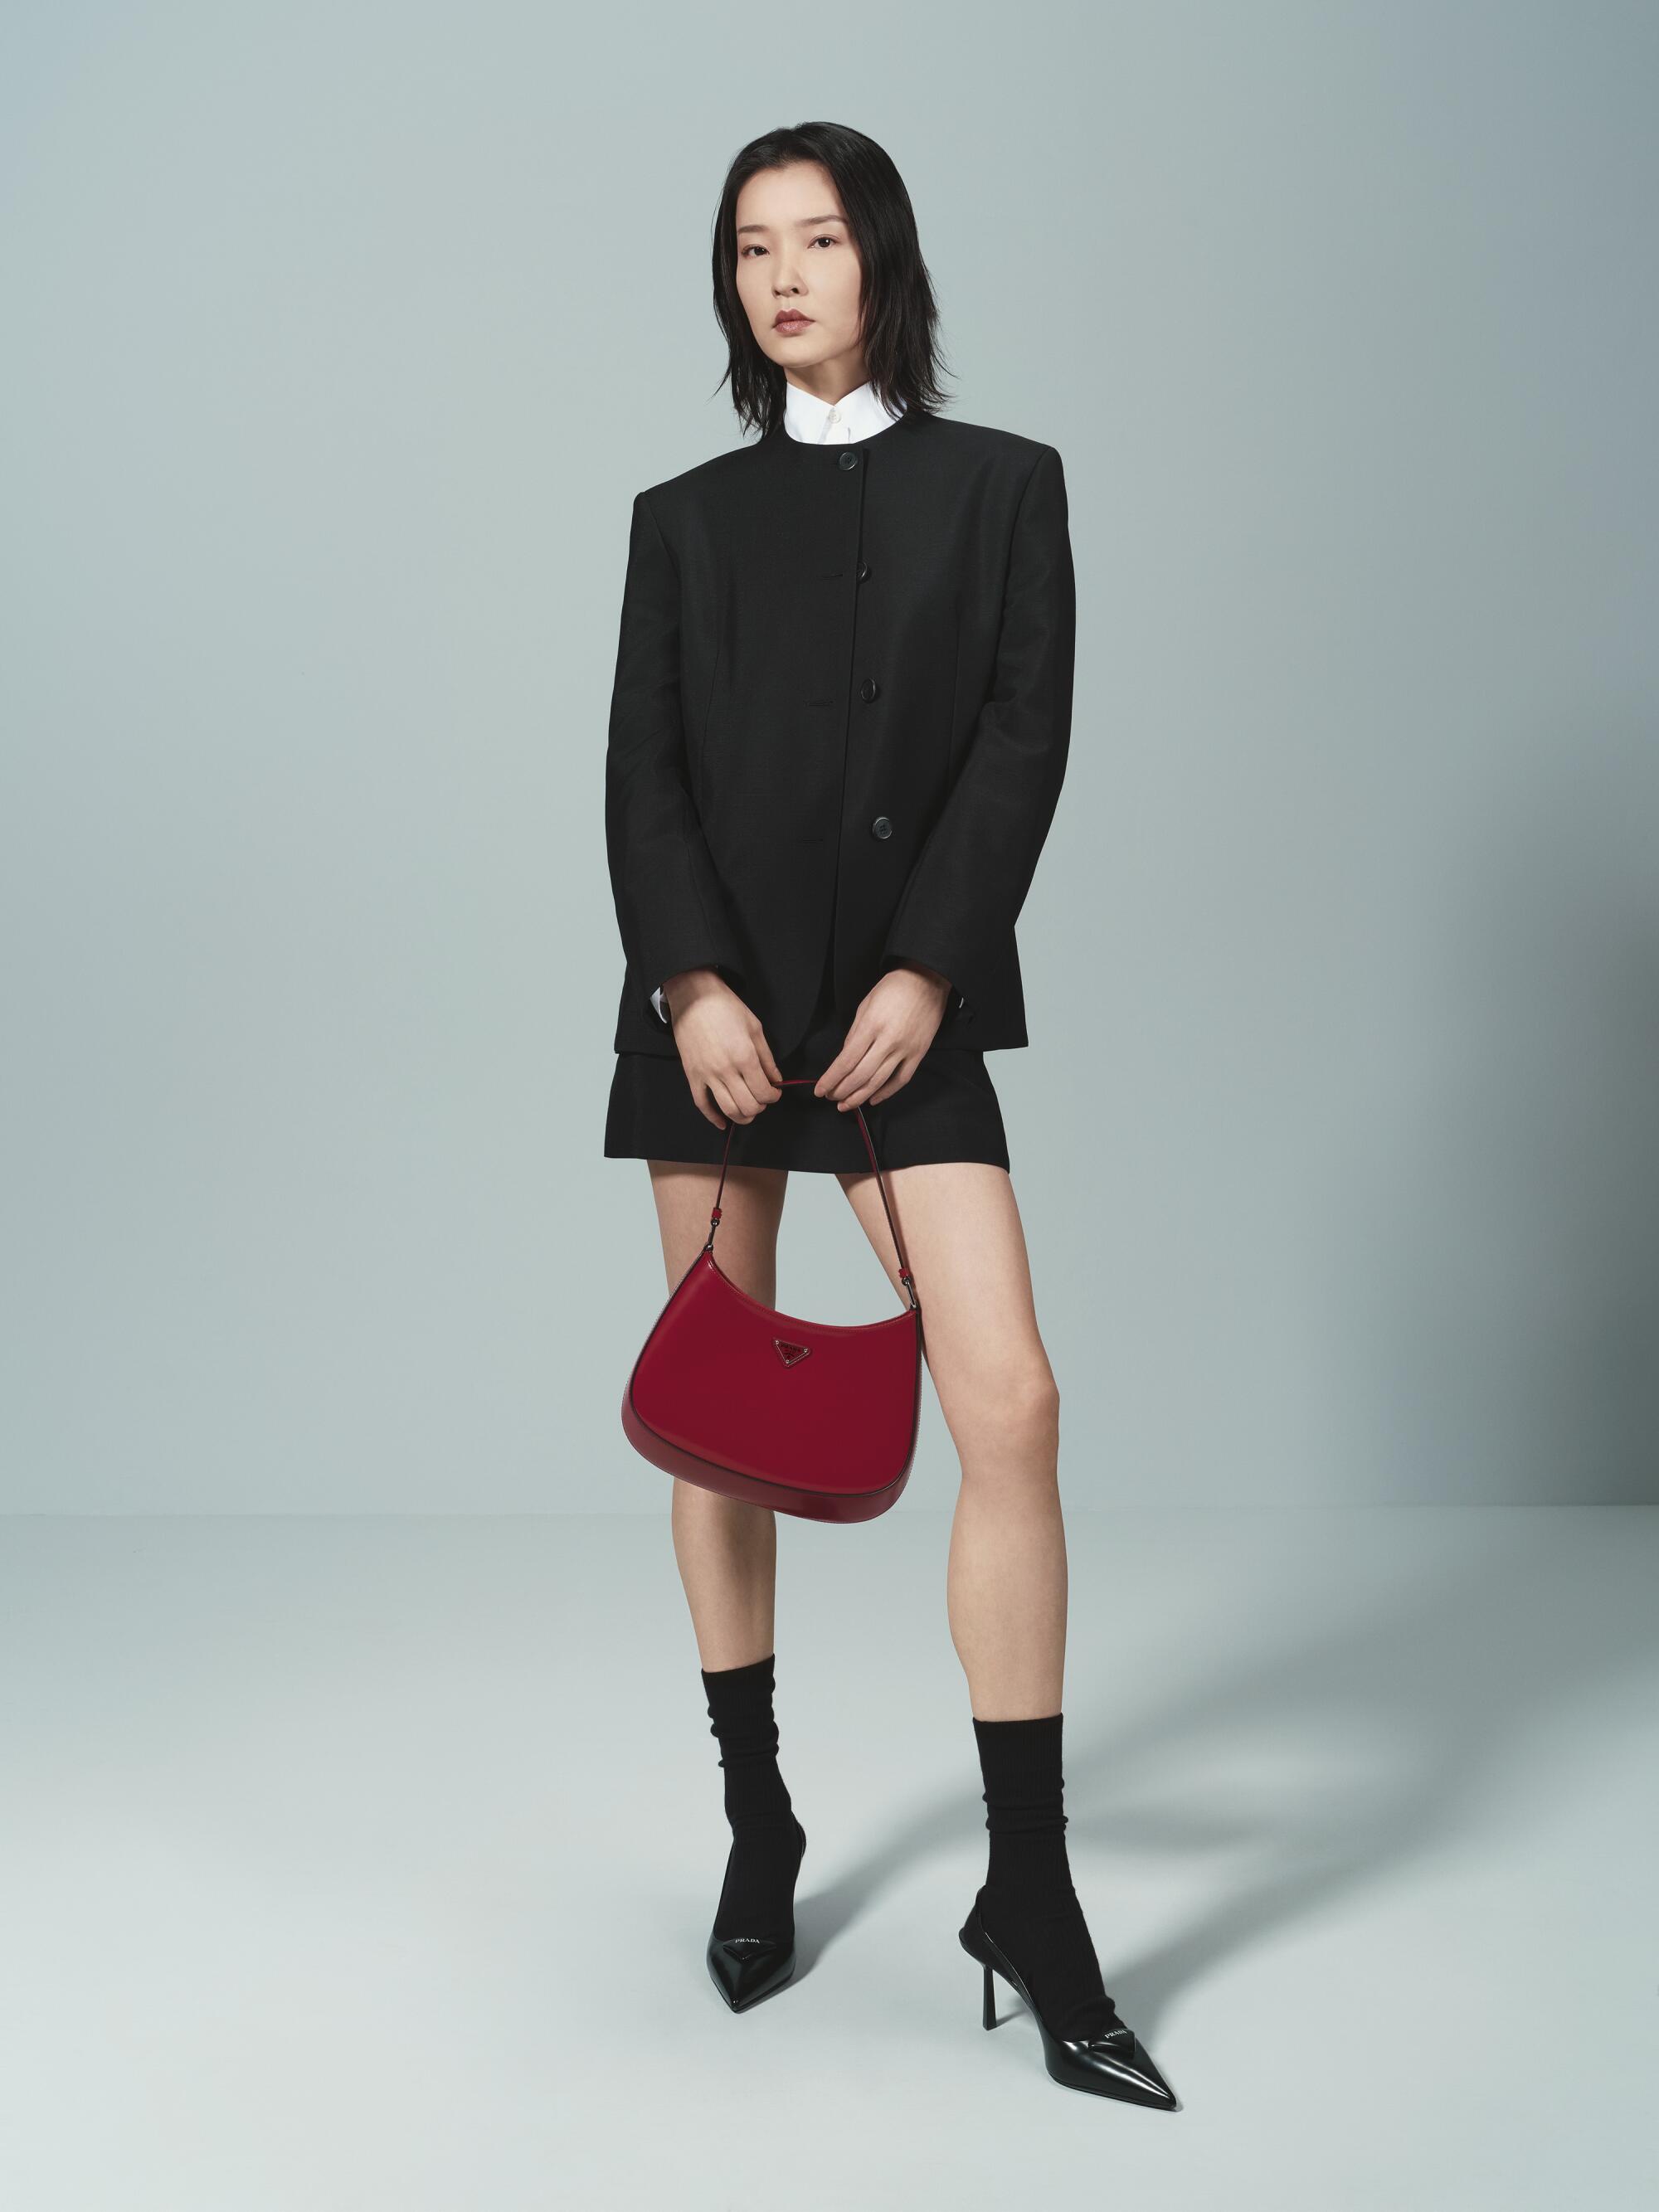 A model wears a black skirt and a jacket with a high collar